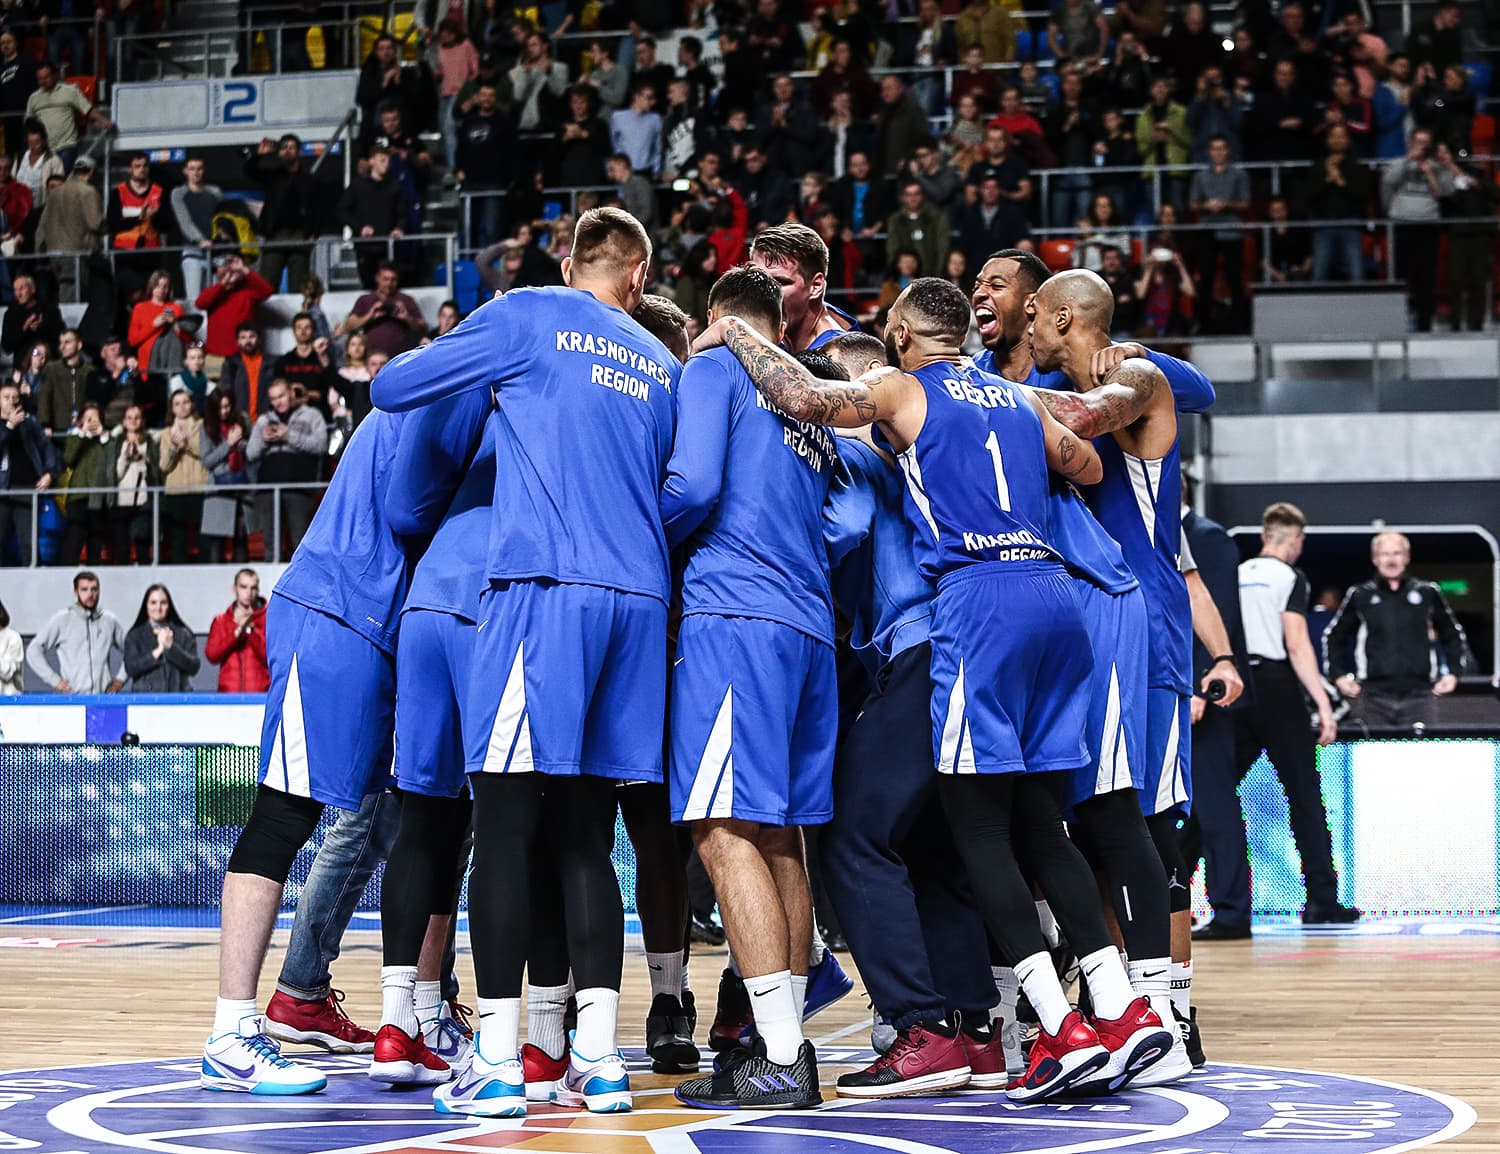 Enisey and Kalev, what are you doing? Go on! Two sensations on the start of the season